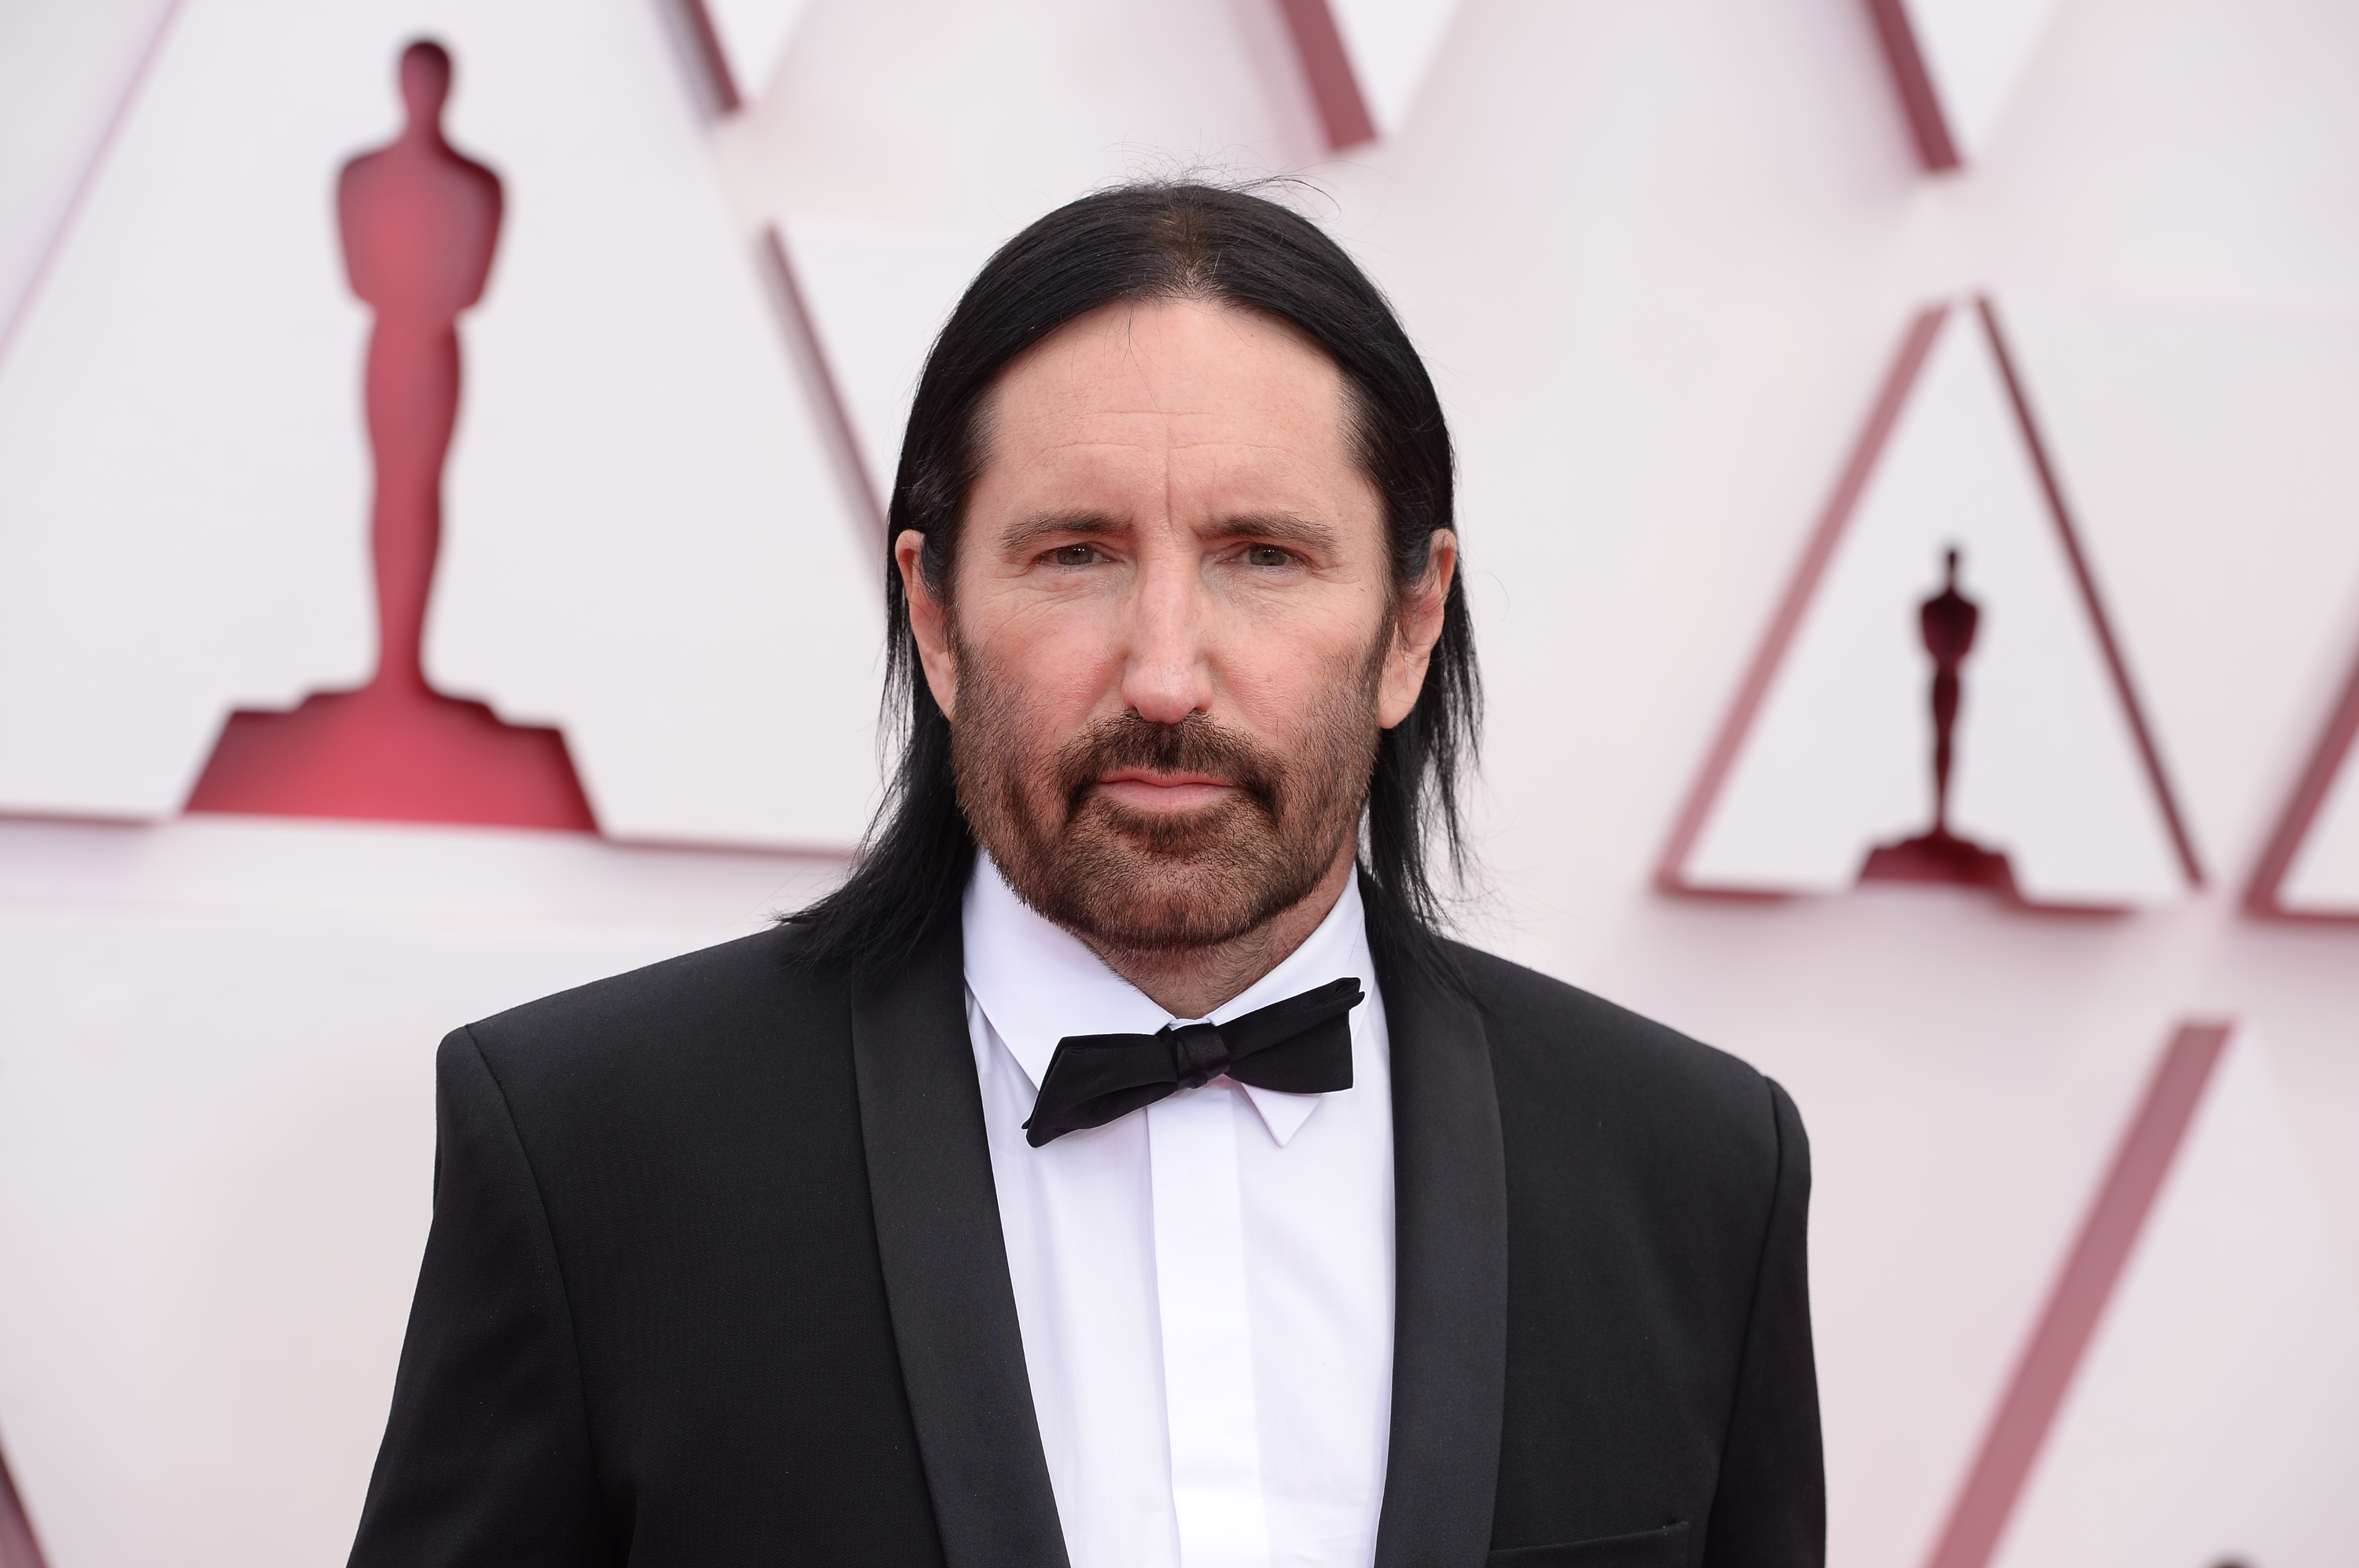 Trent Reznor looks into the camera while attending the 2021 Academy Awards ceremony